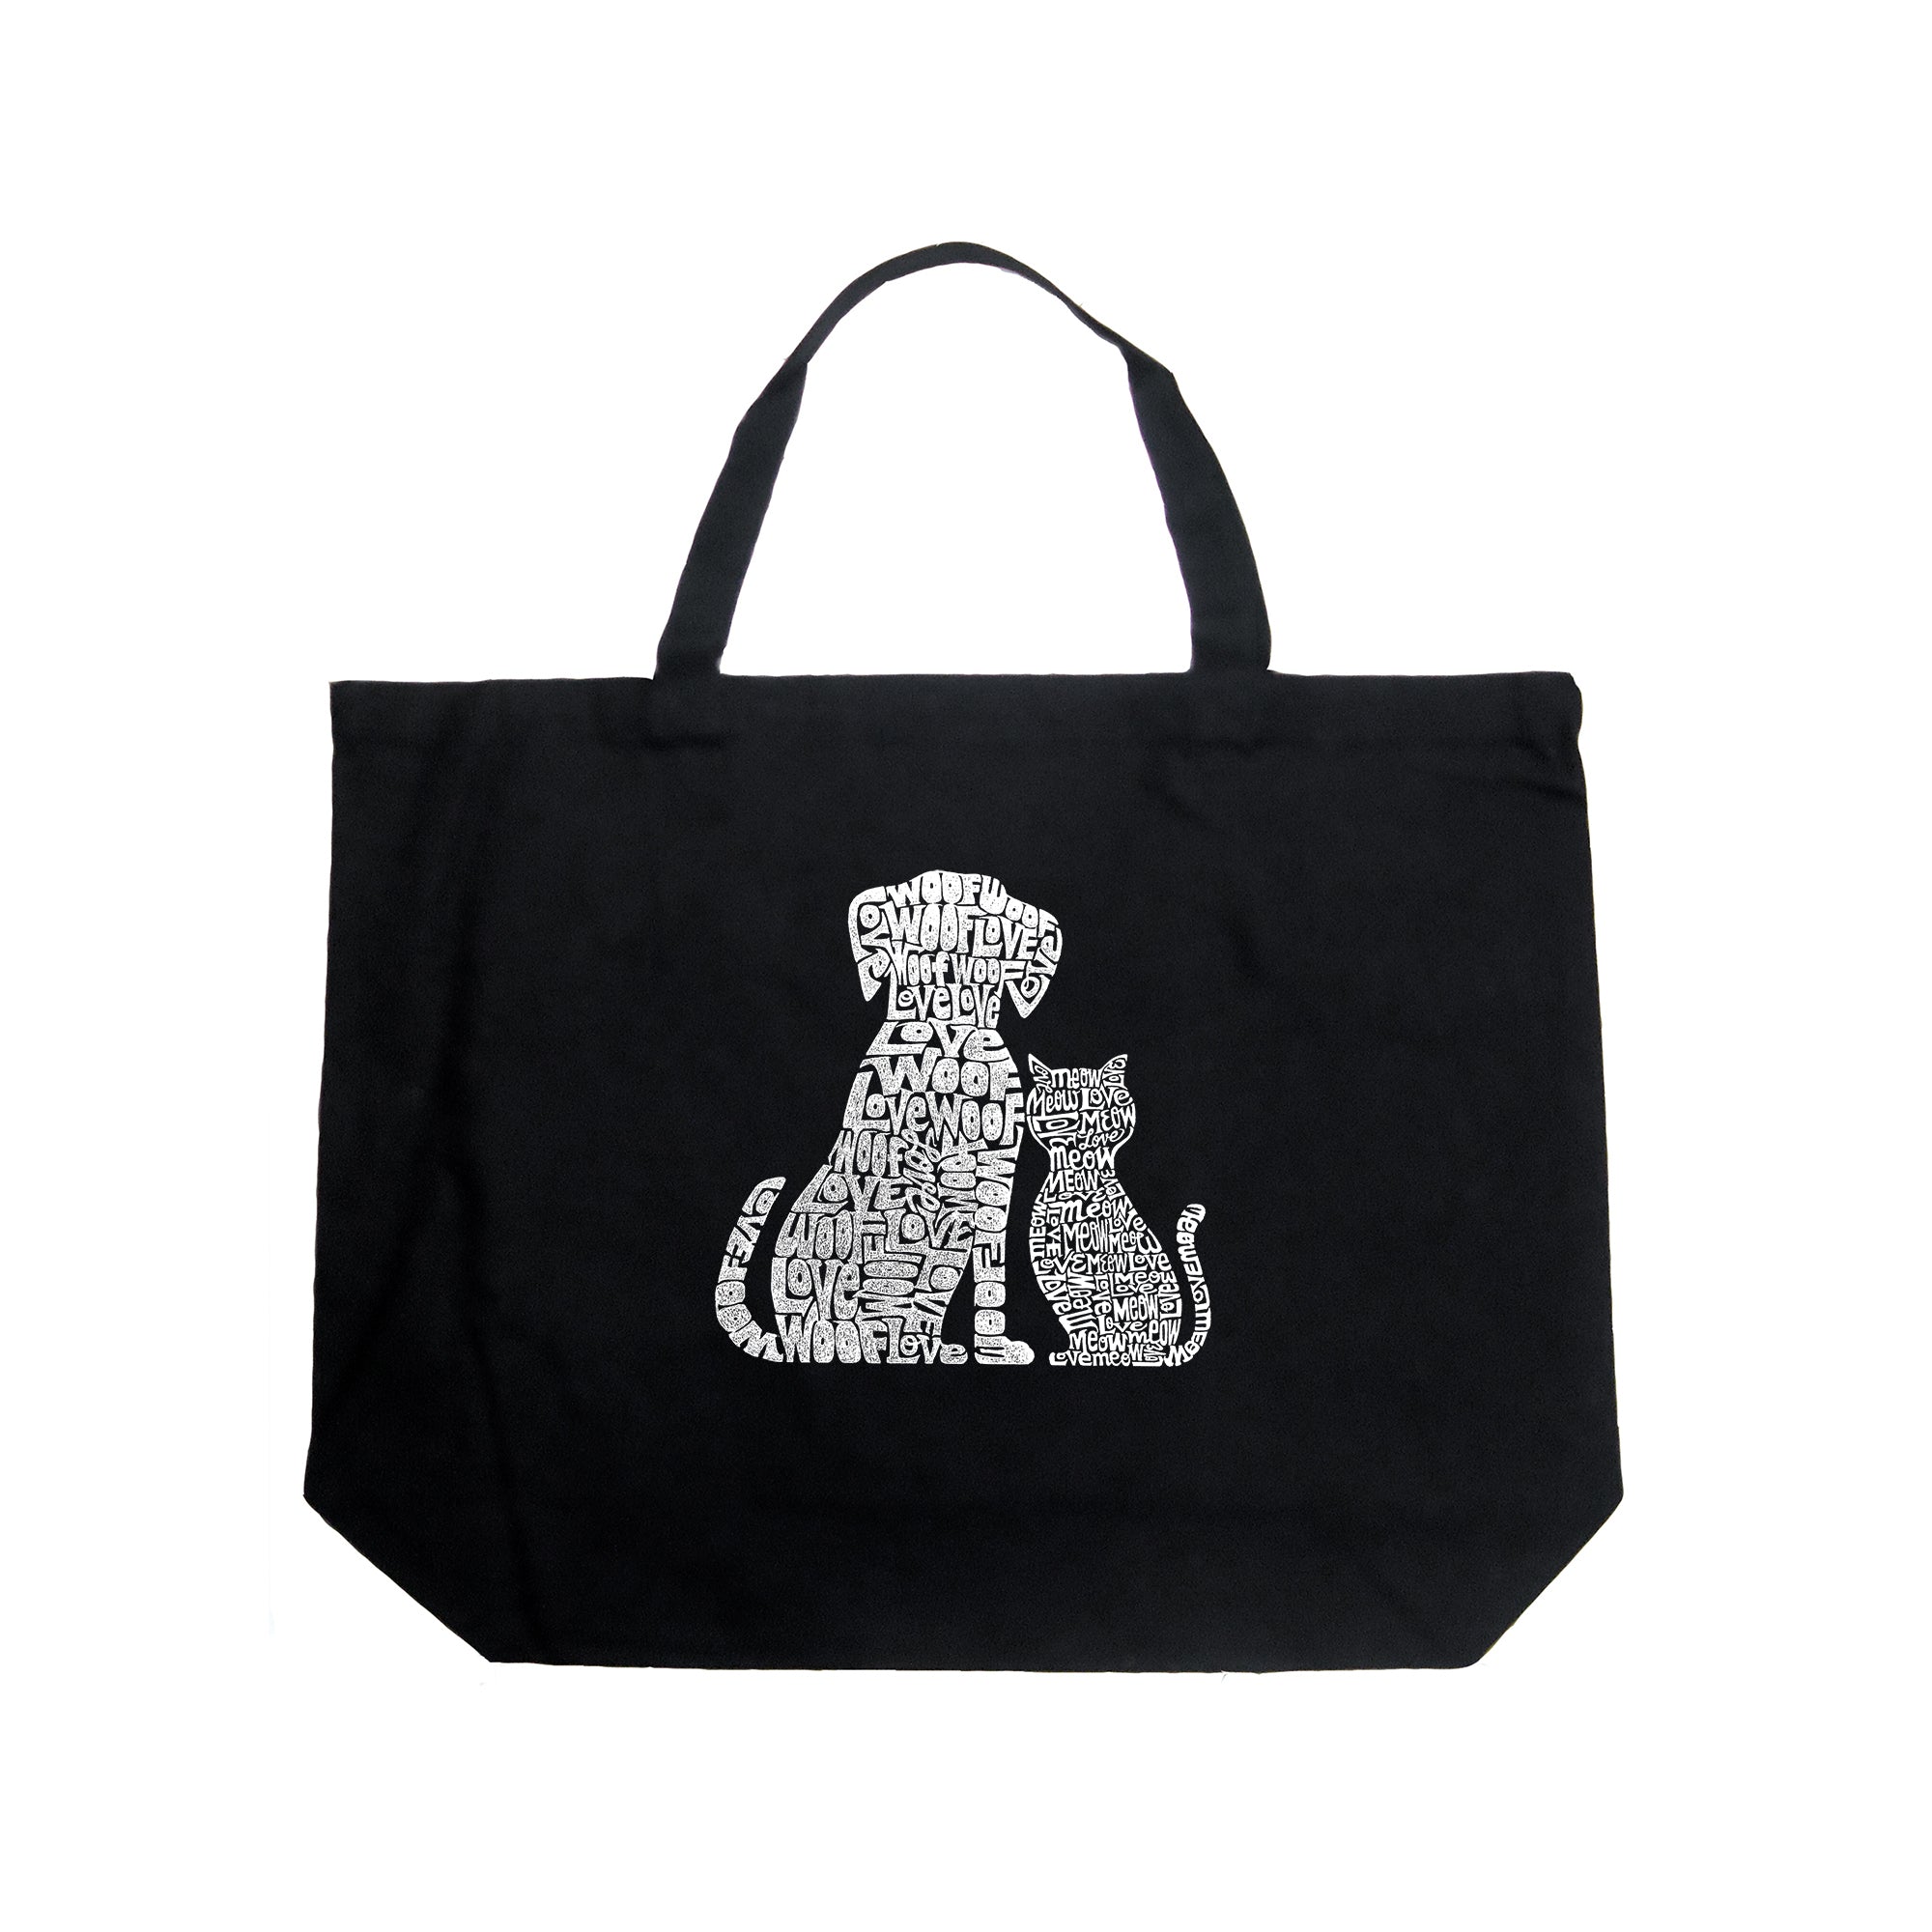 Large Word Art Tote Bag - Dogs And Cats - Large - Black